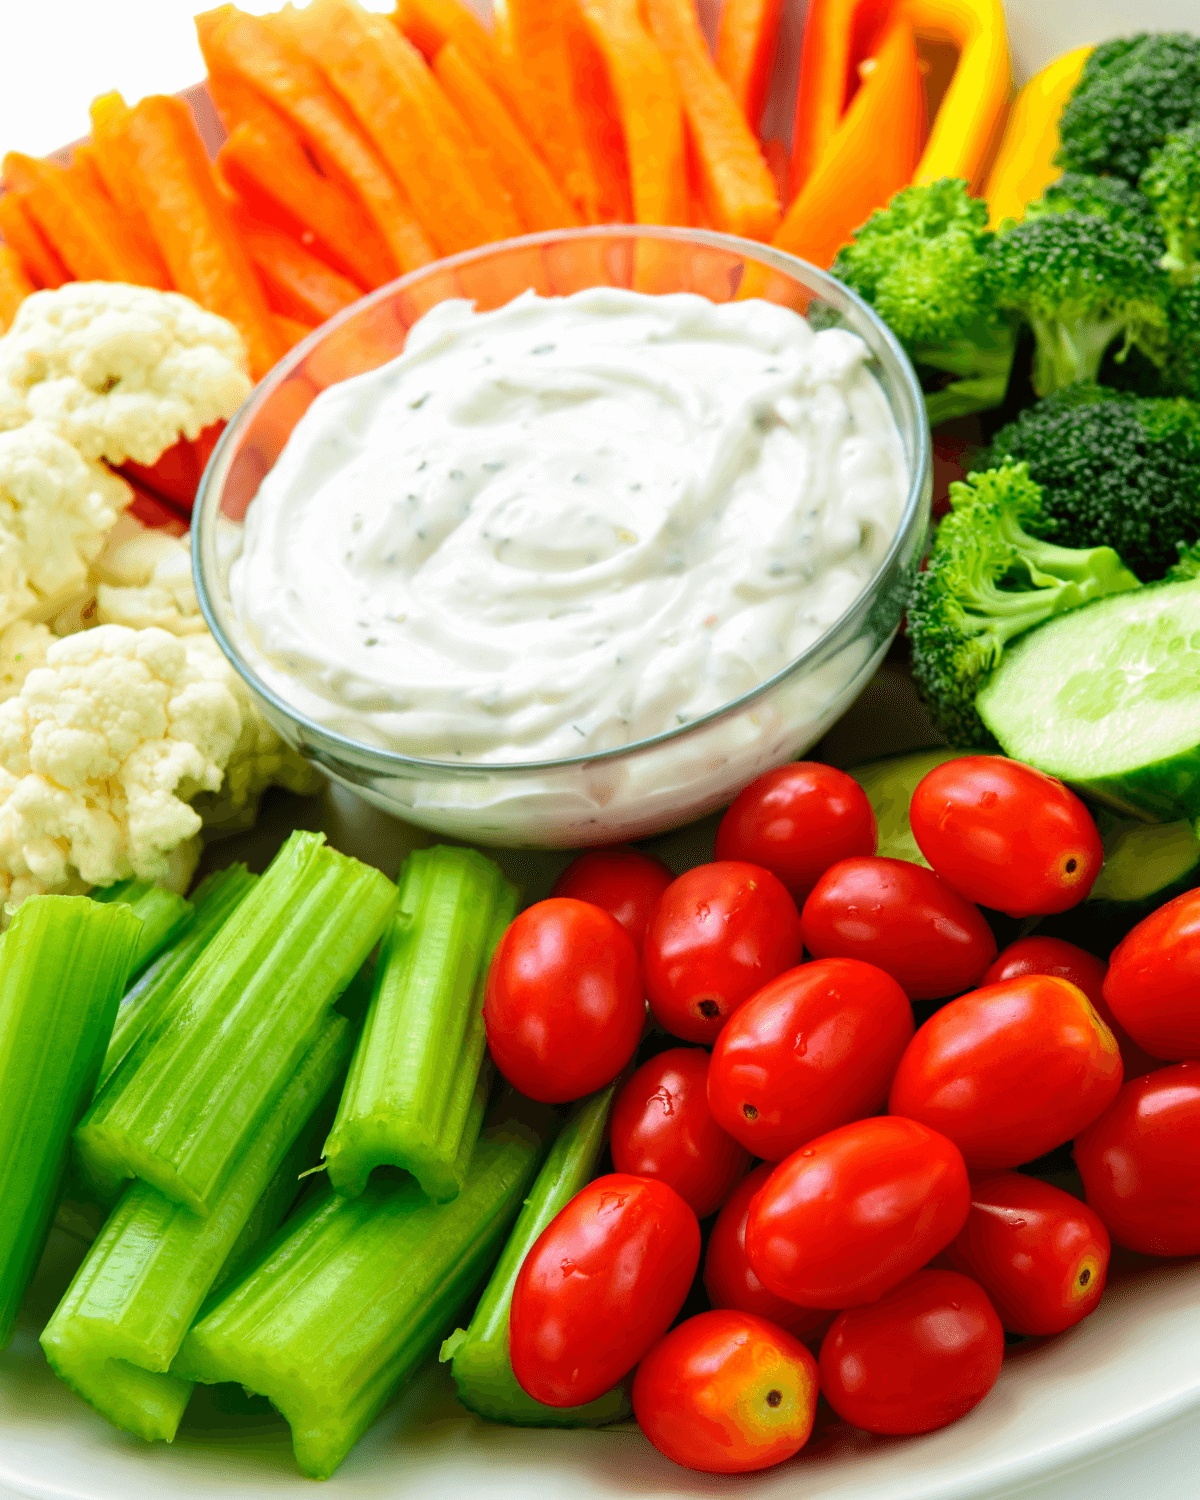 A plate of vegetables with Sour Cream and Ranch Dip.